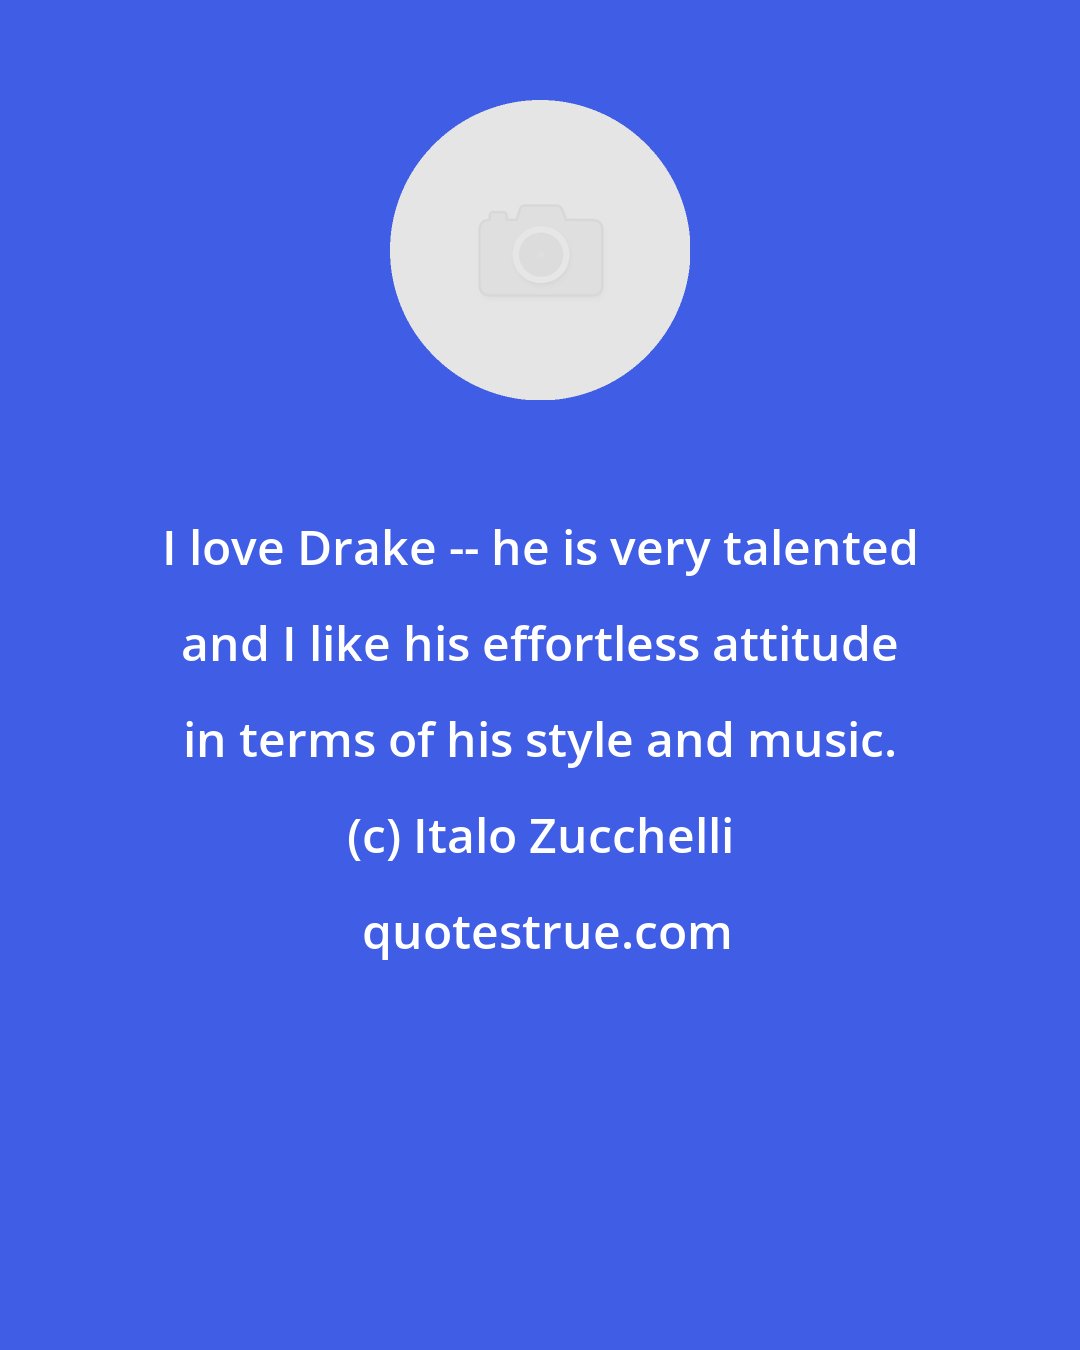 Italo Zucchelli: I love Drake -- he is very talented and I like his effortless attitude in terms of his style and music.